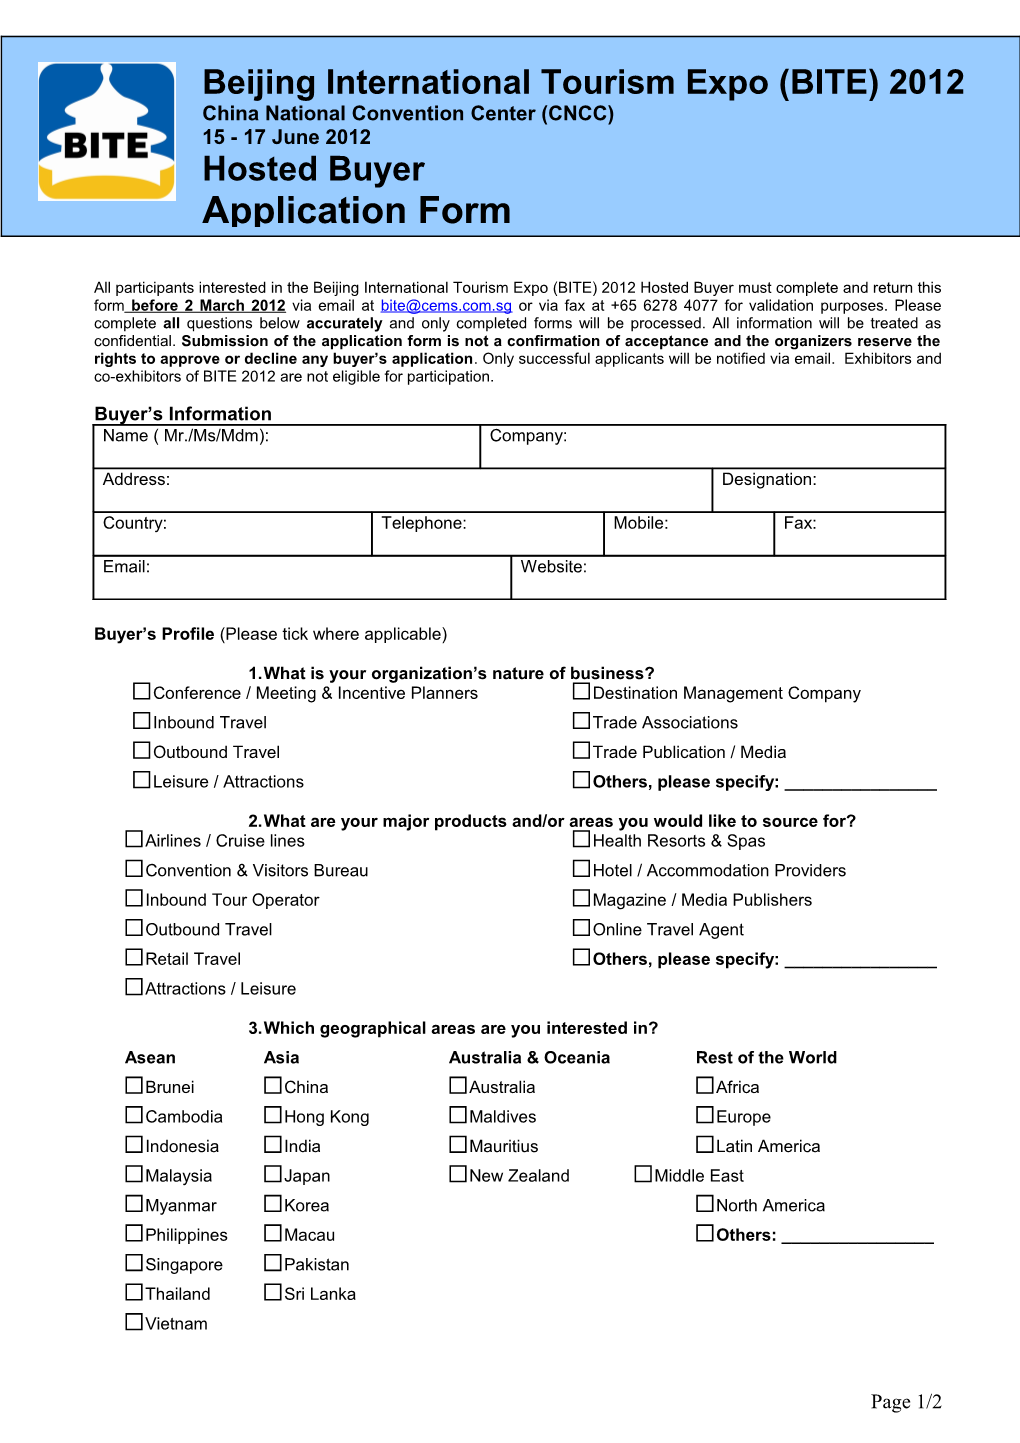 Hosted Buyer Application Form